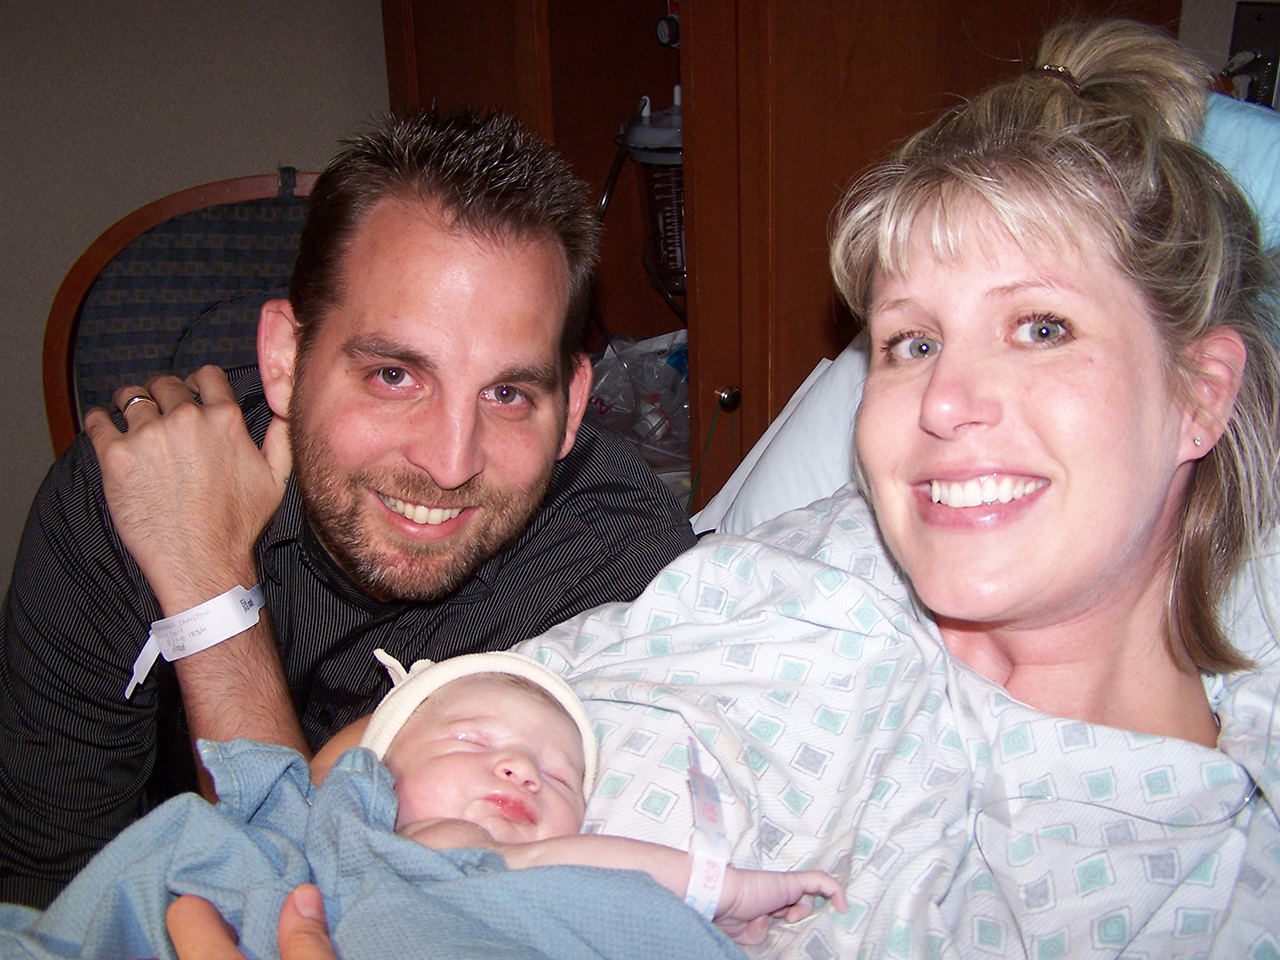 Jason Schoellen with his wife and newborn baby daughter